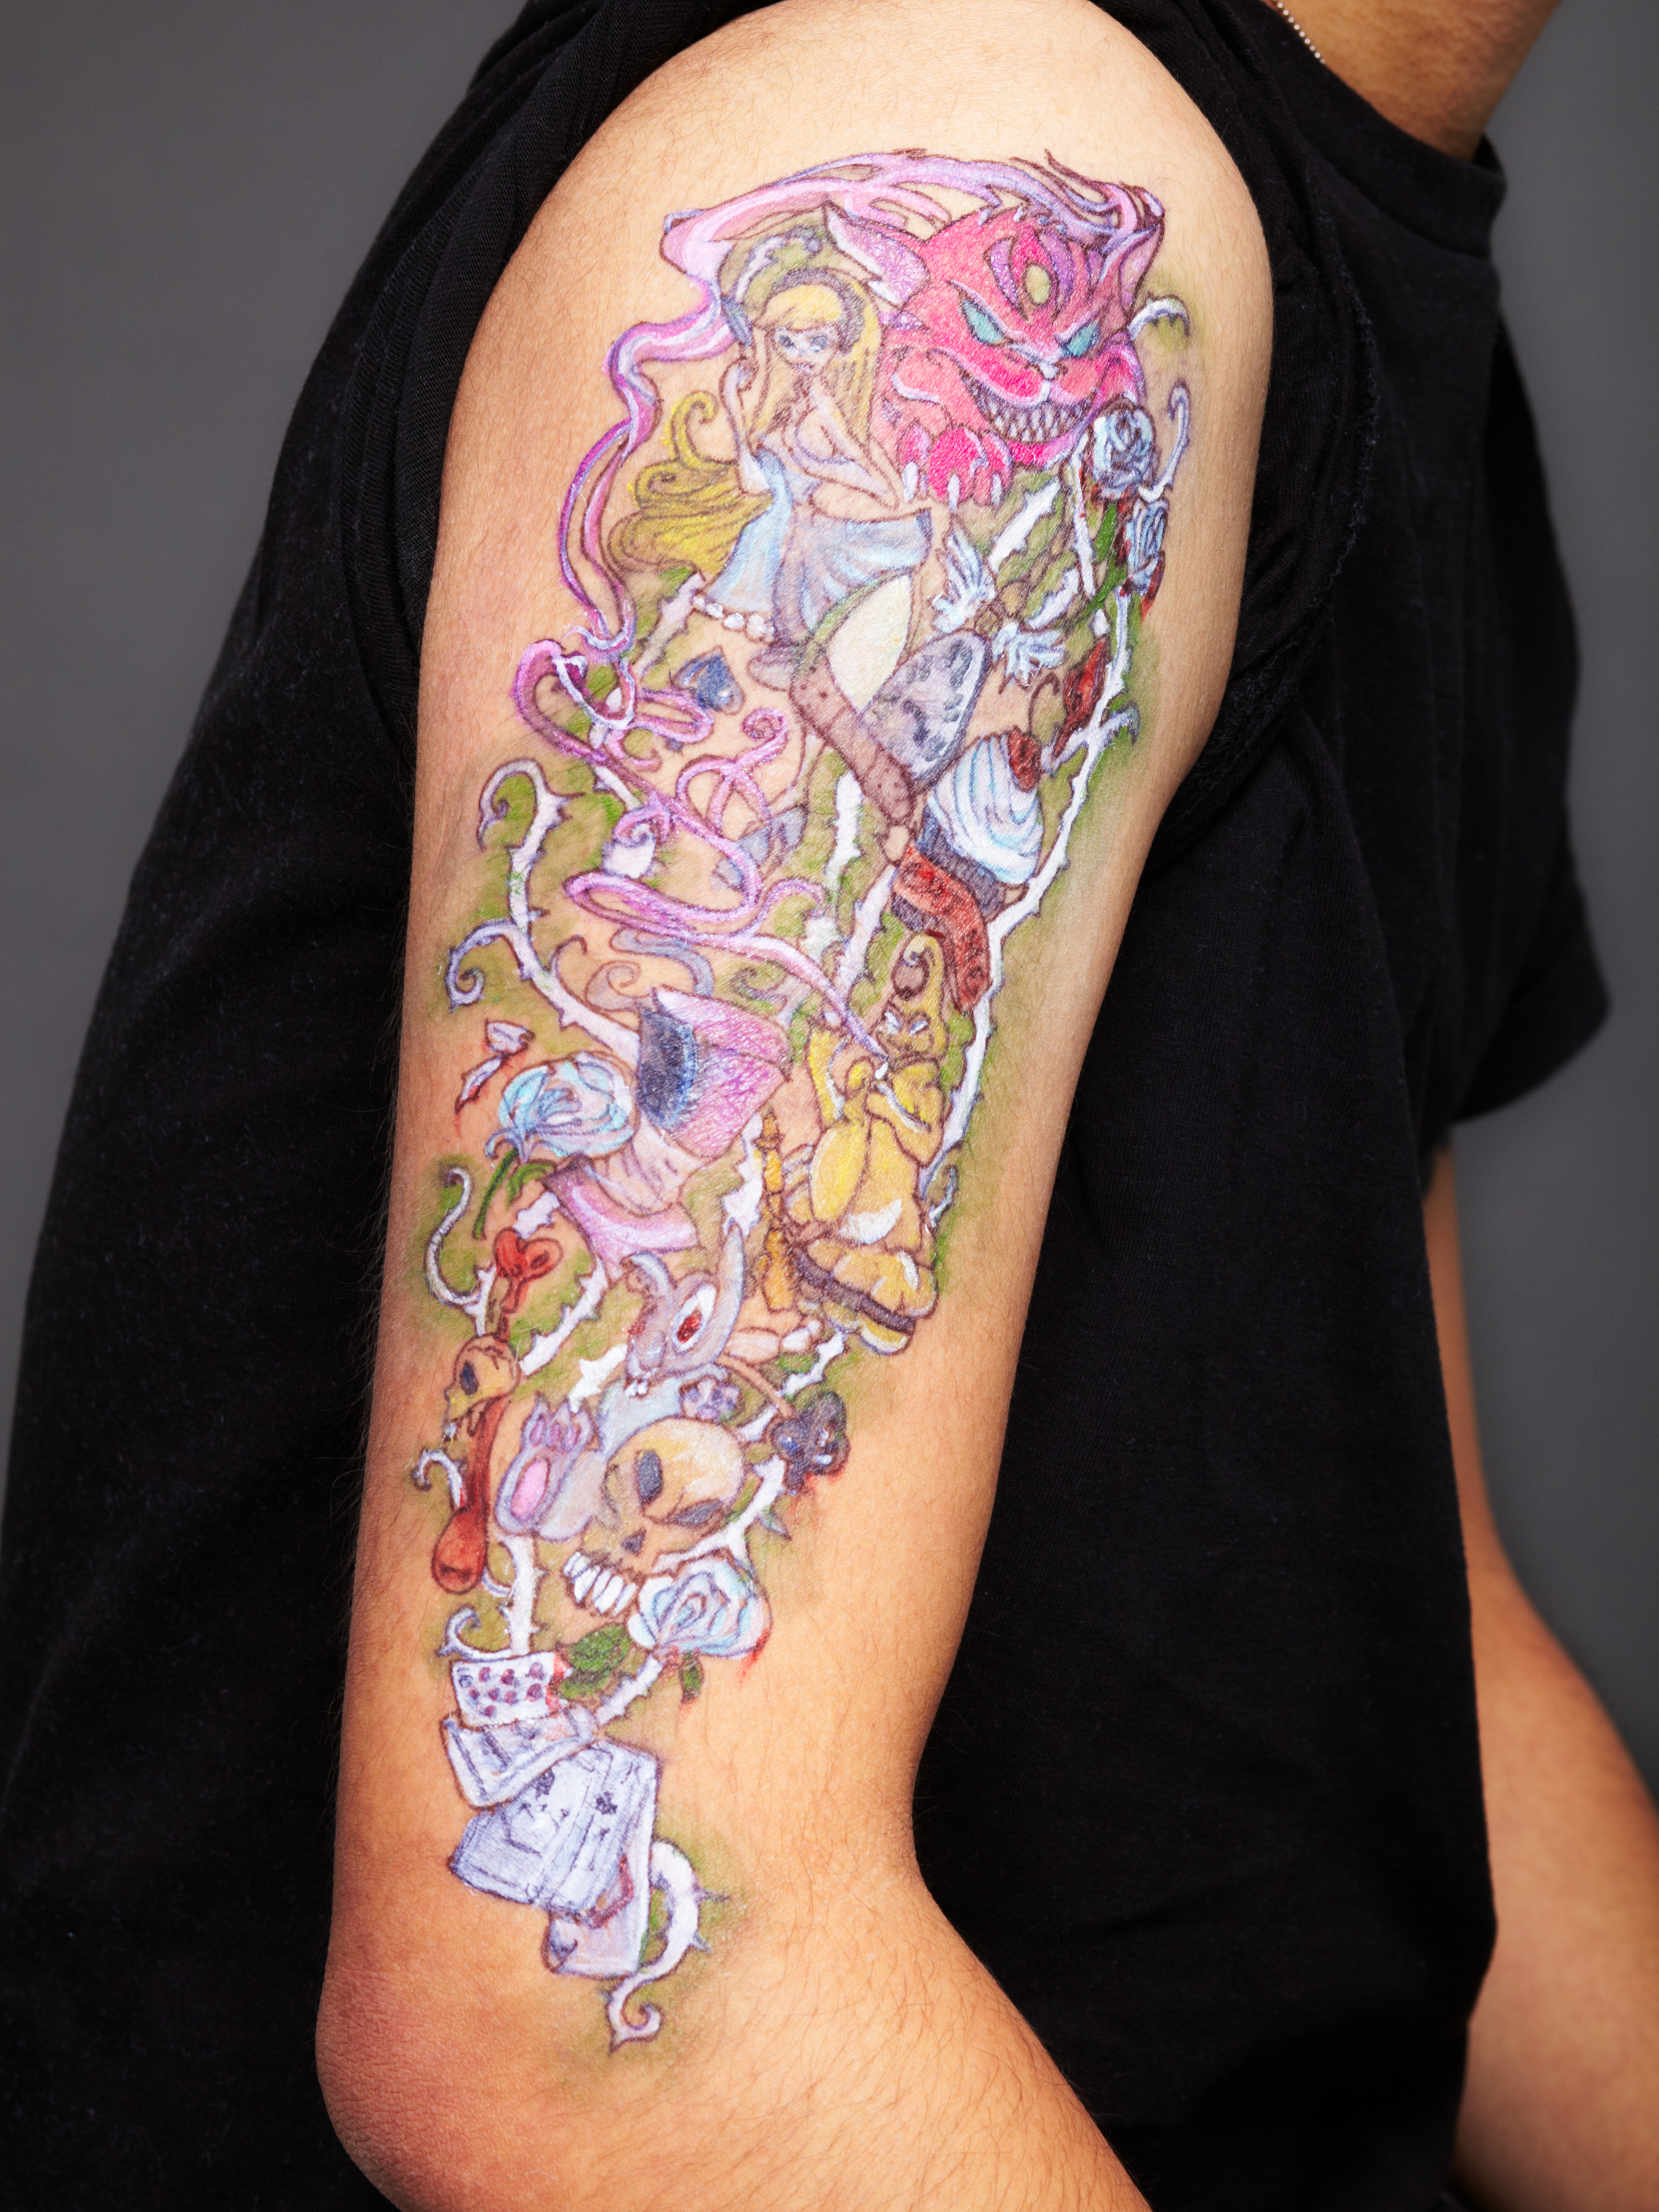 Alice In Wonderland Tattoos Designs, Ideas and Meaning | Tattoos For You